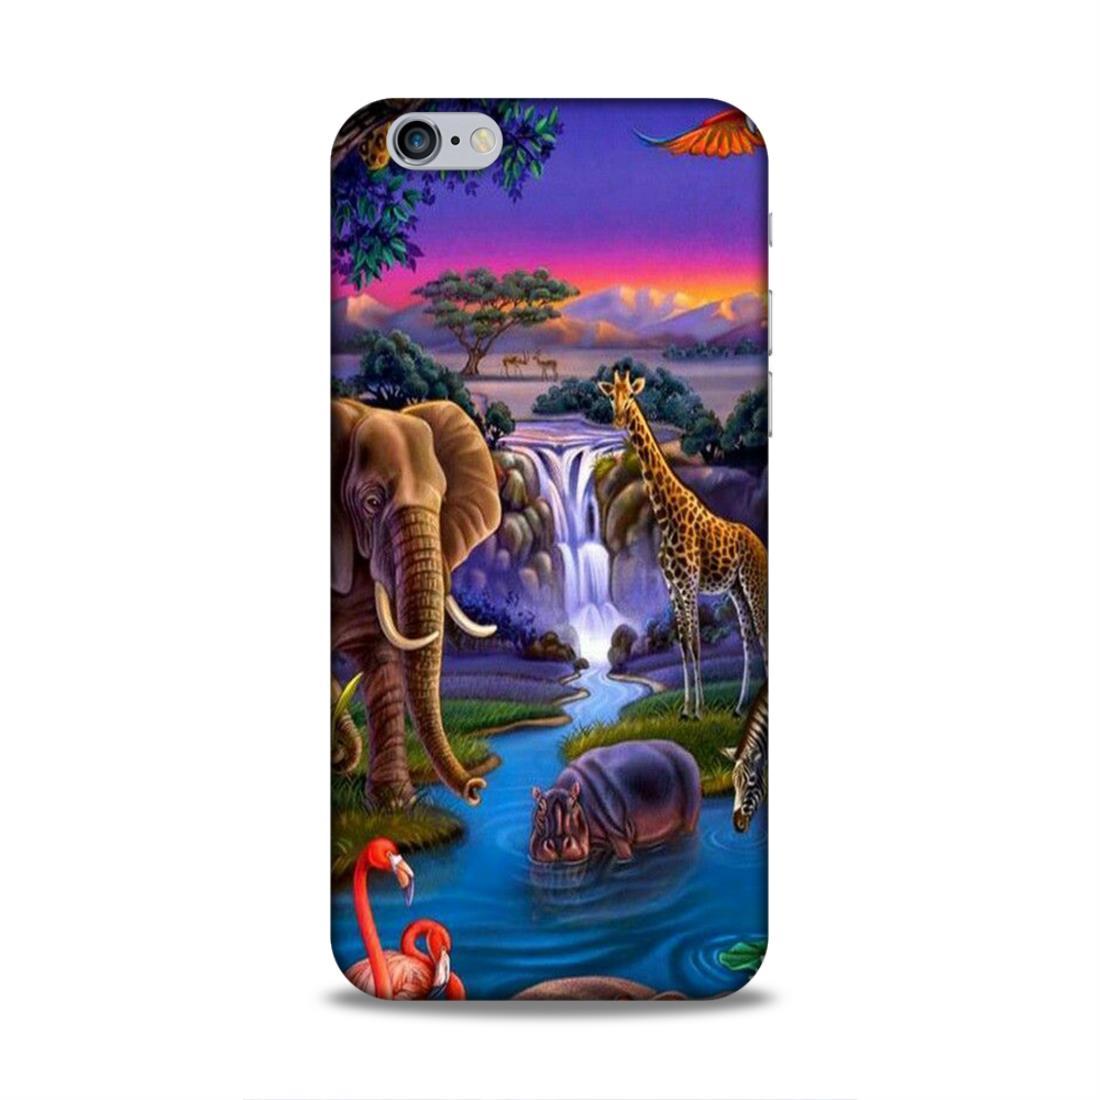 Jungle Art iPhone 6 Mobile Cover